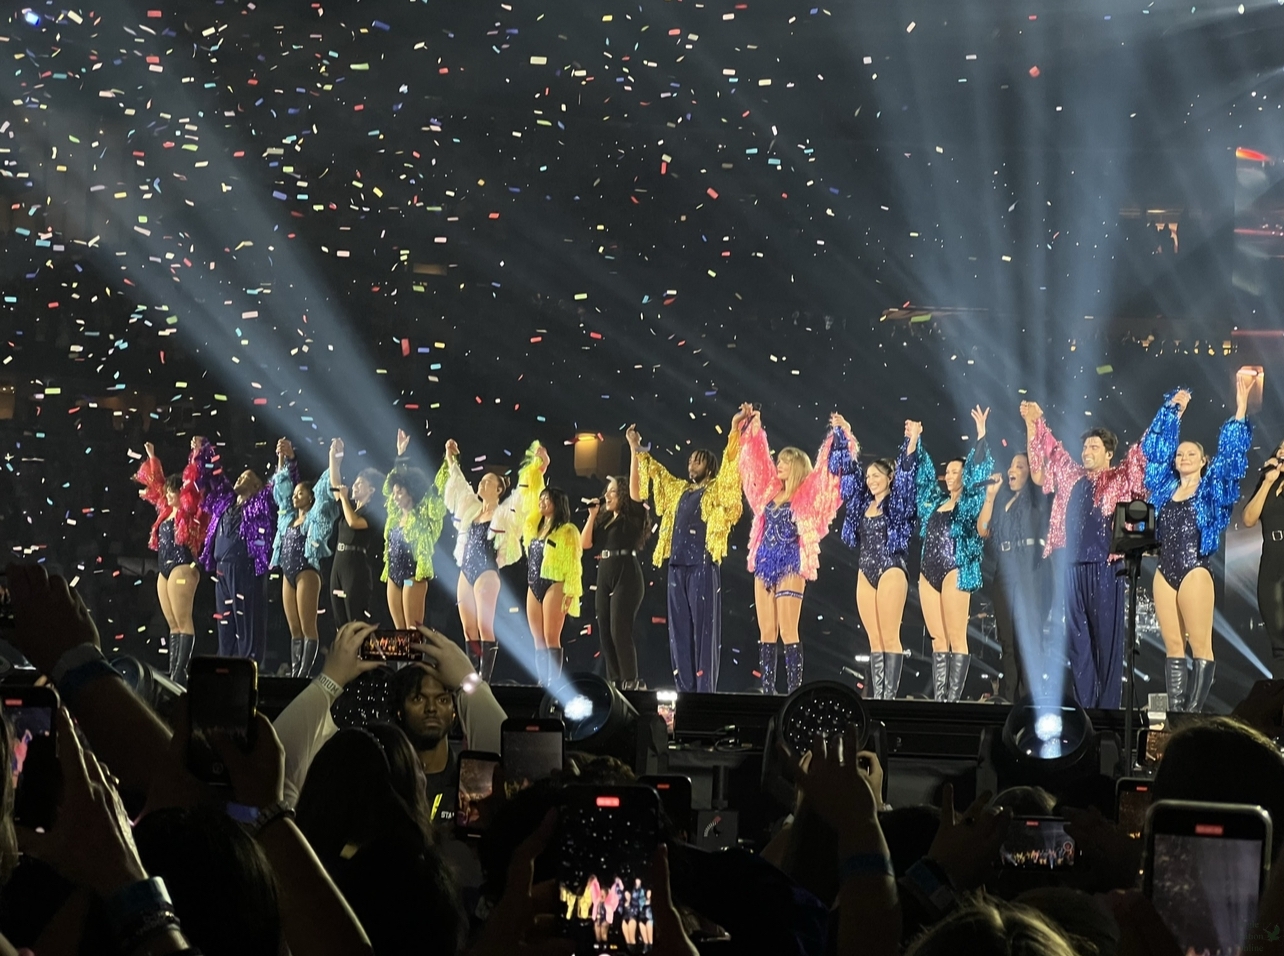 Taylor Swift Era's Tour movie review: Every seat is the best seat